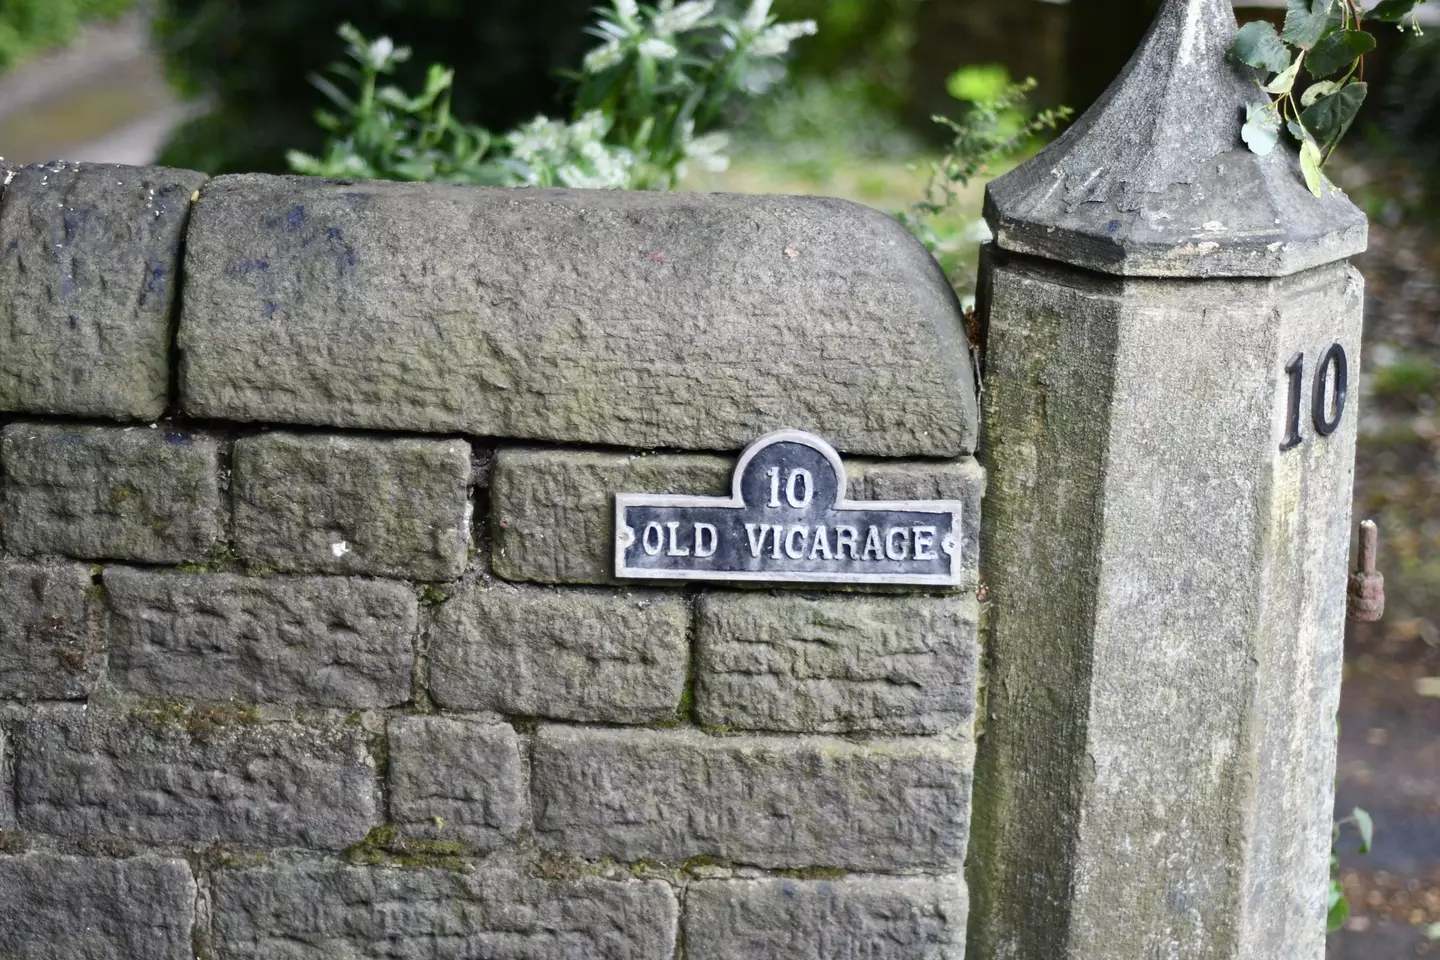 It's important to signpost your property safely (